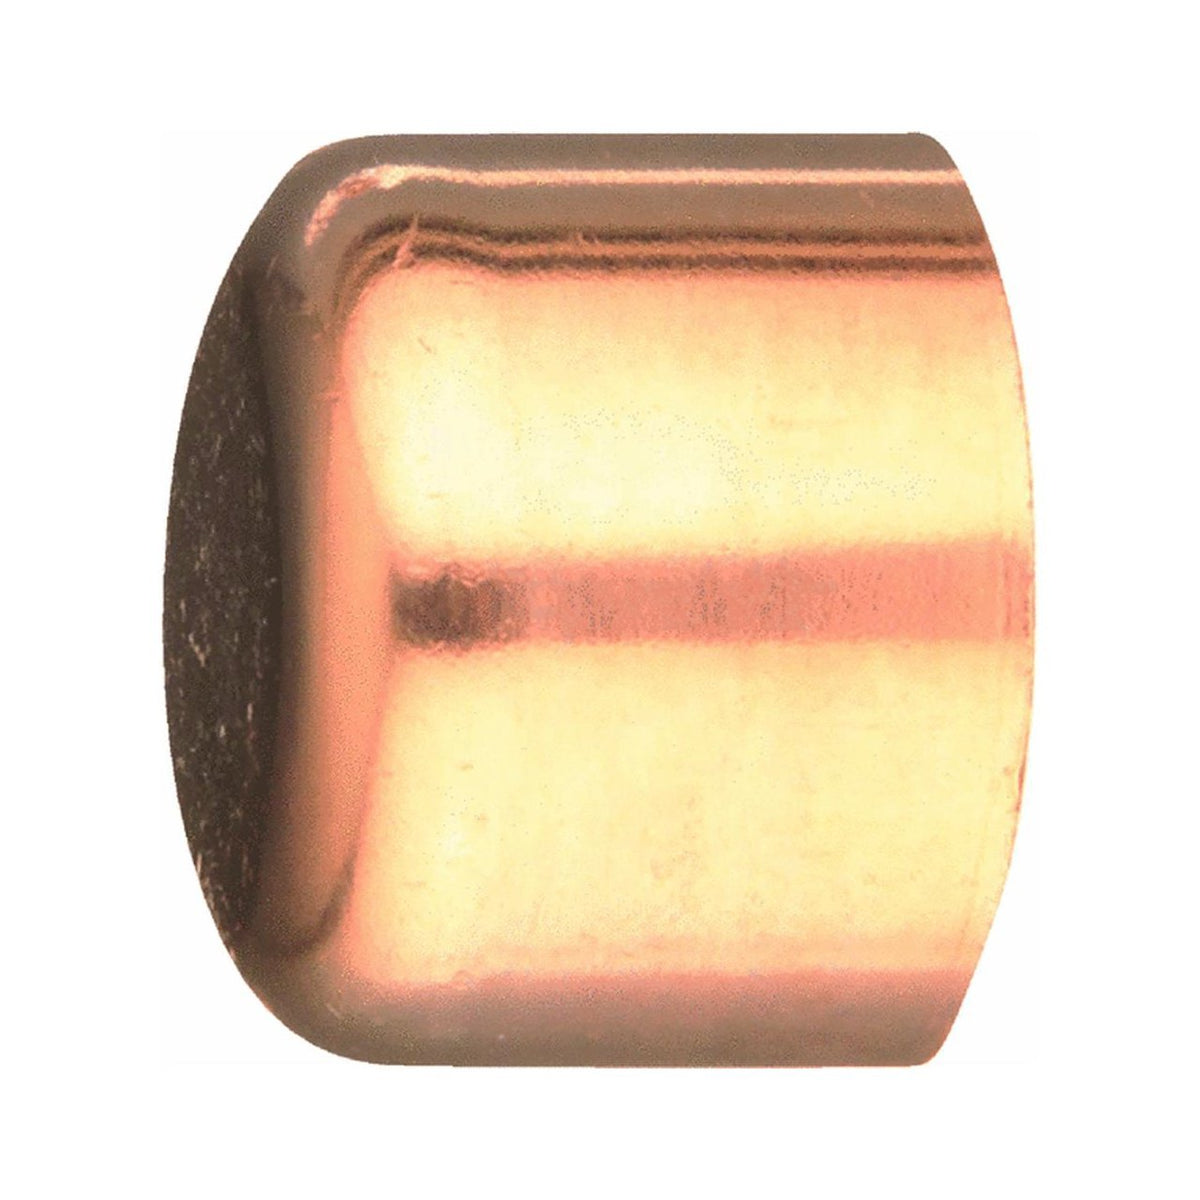 buy copper pipe fittings & tube caps at cheap rate in bulk. wholesale & retail plumbing materials & goods store. home décor ideas, maintenance, repair replacement parts